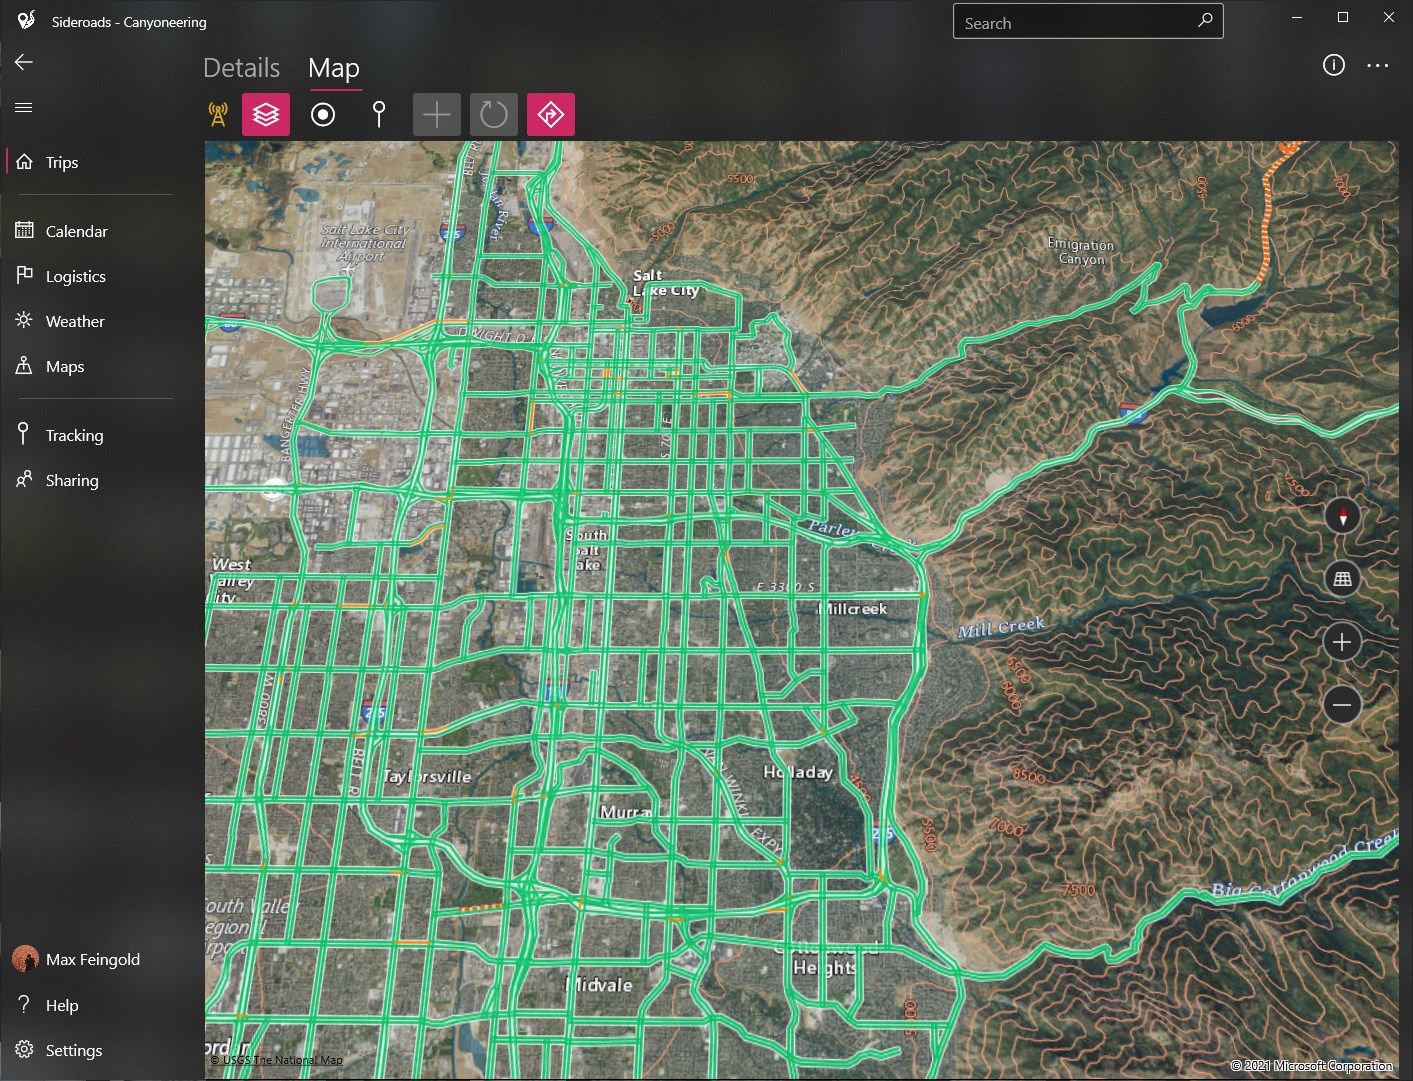 USGS imagery with topo, traffic overlay